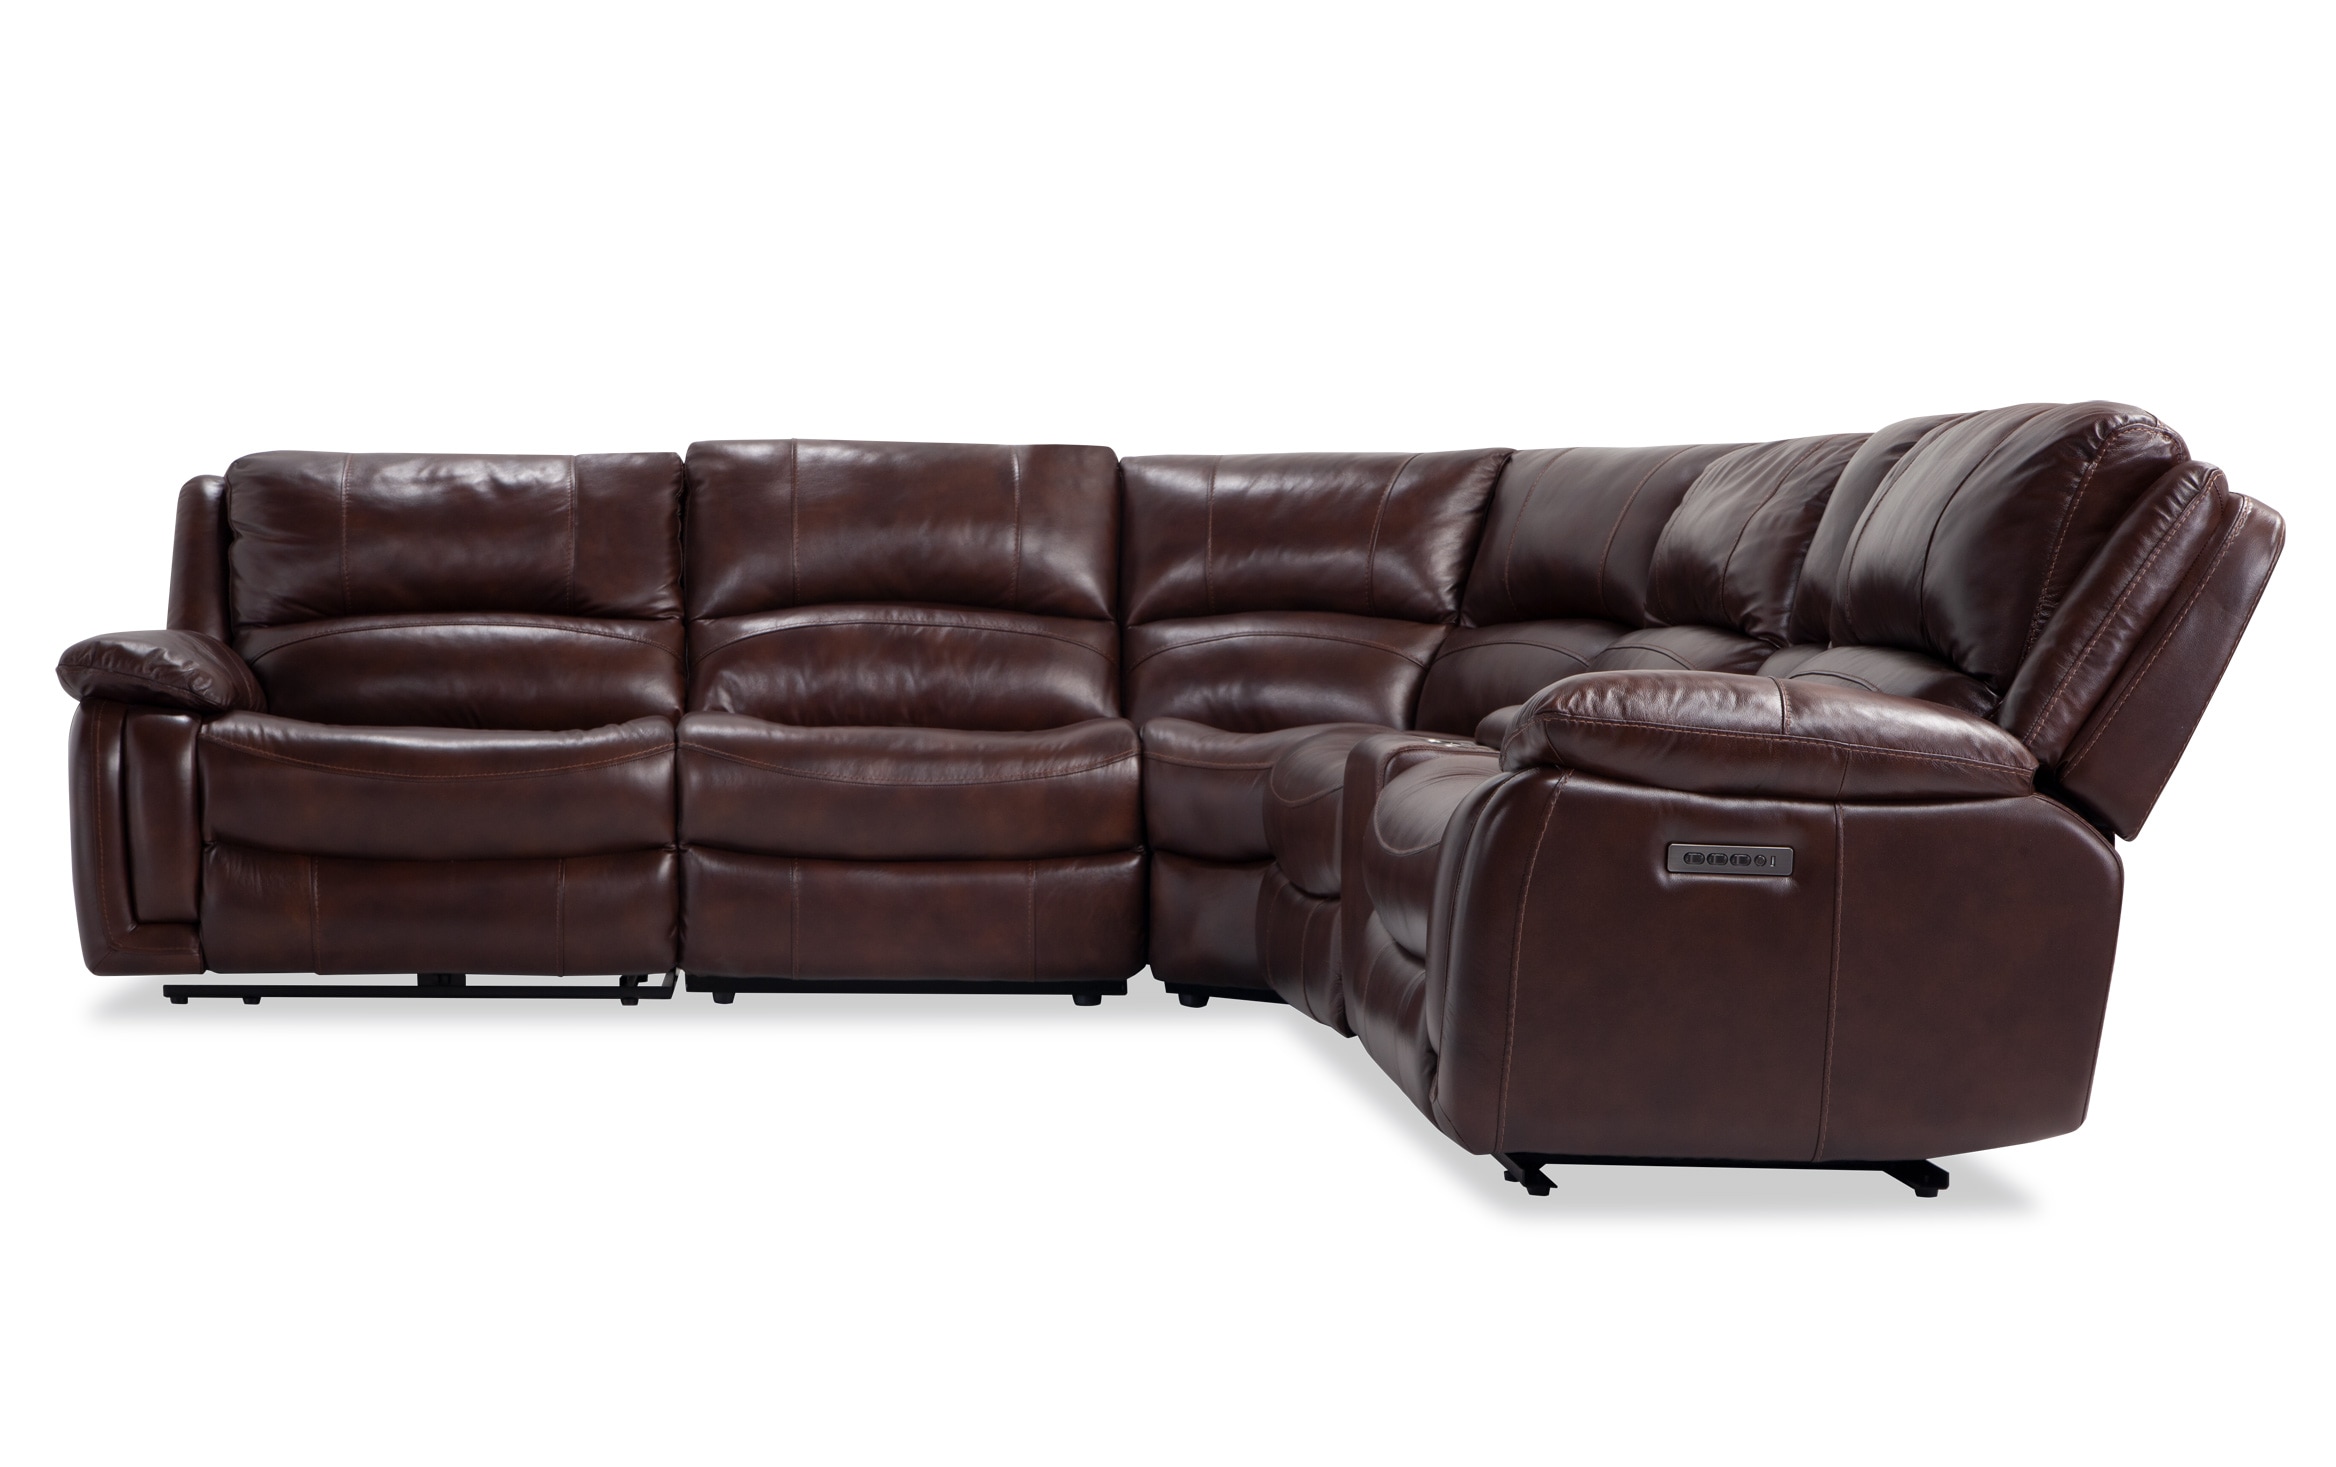 6 Piece Power Reclining Sectional, Brown Leather Couch Recliner